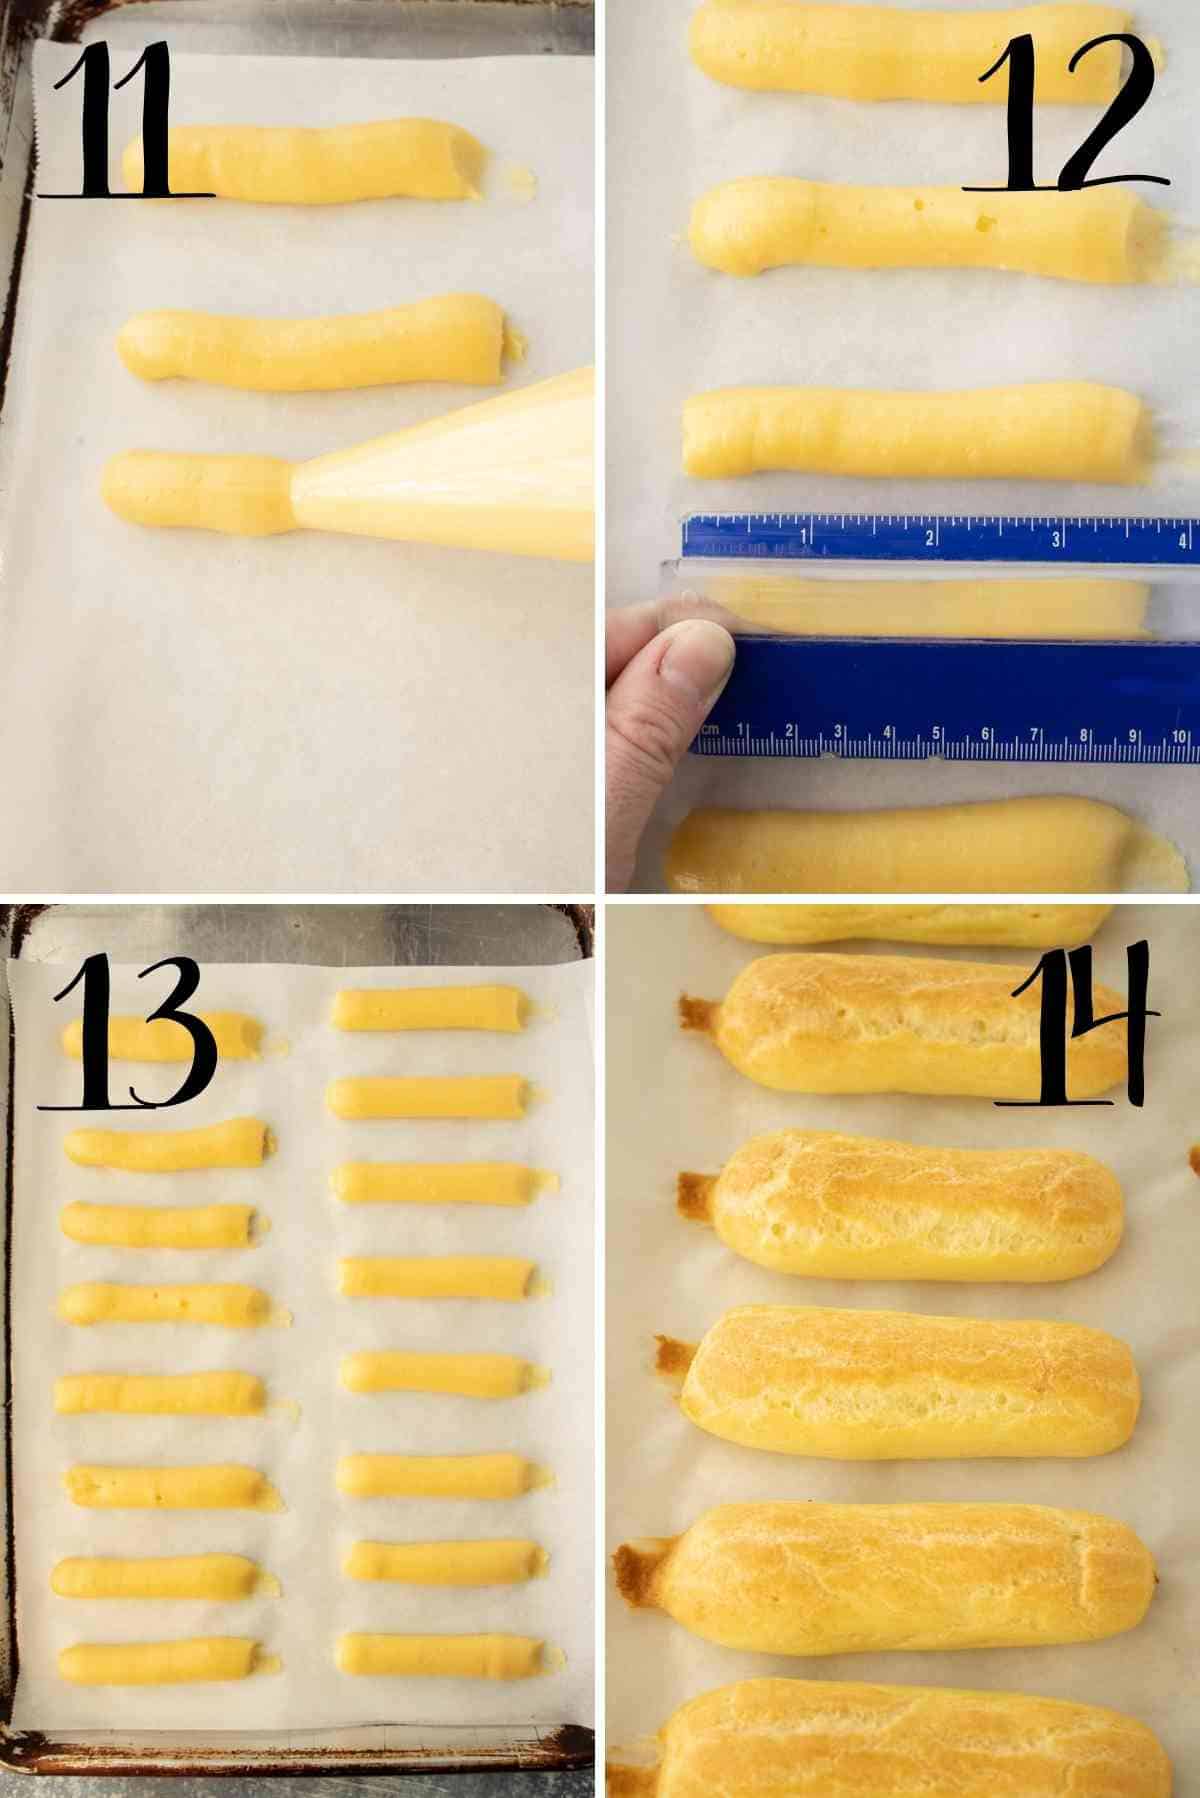 Pipe the choux paste into 3 inch strips on a prepared baking sheet.